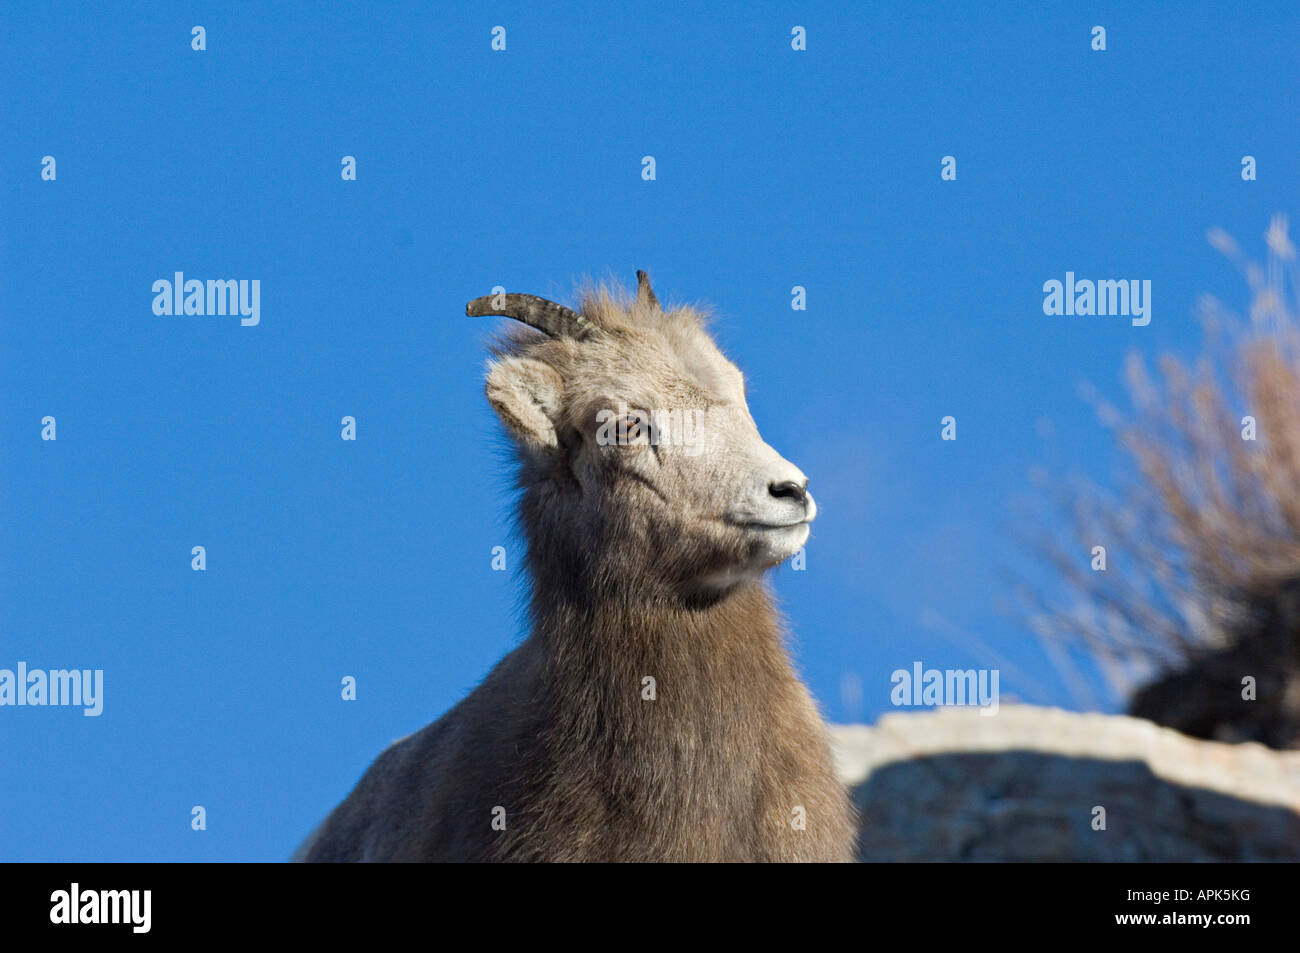 A young female Rocky Mountain Bighorn Sheep side view portrait against a blue sky Stock Photo